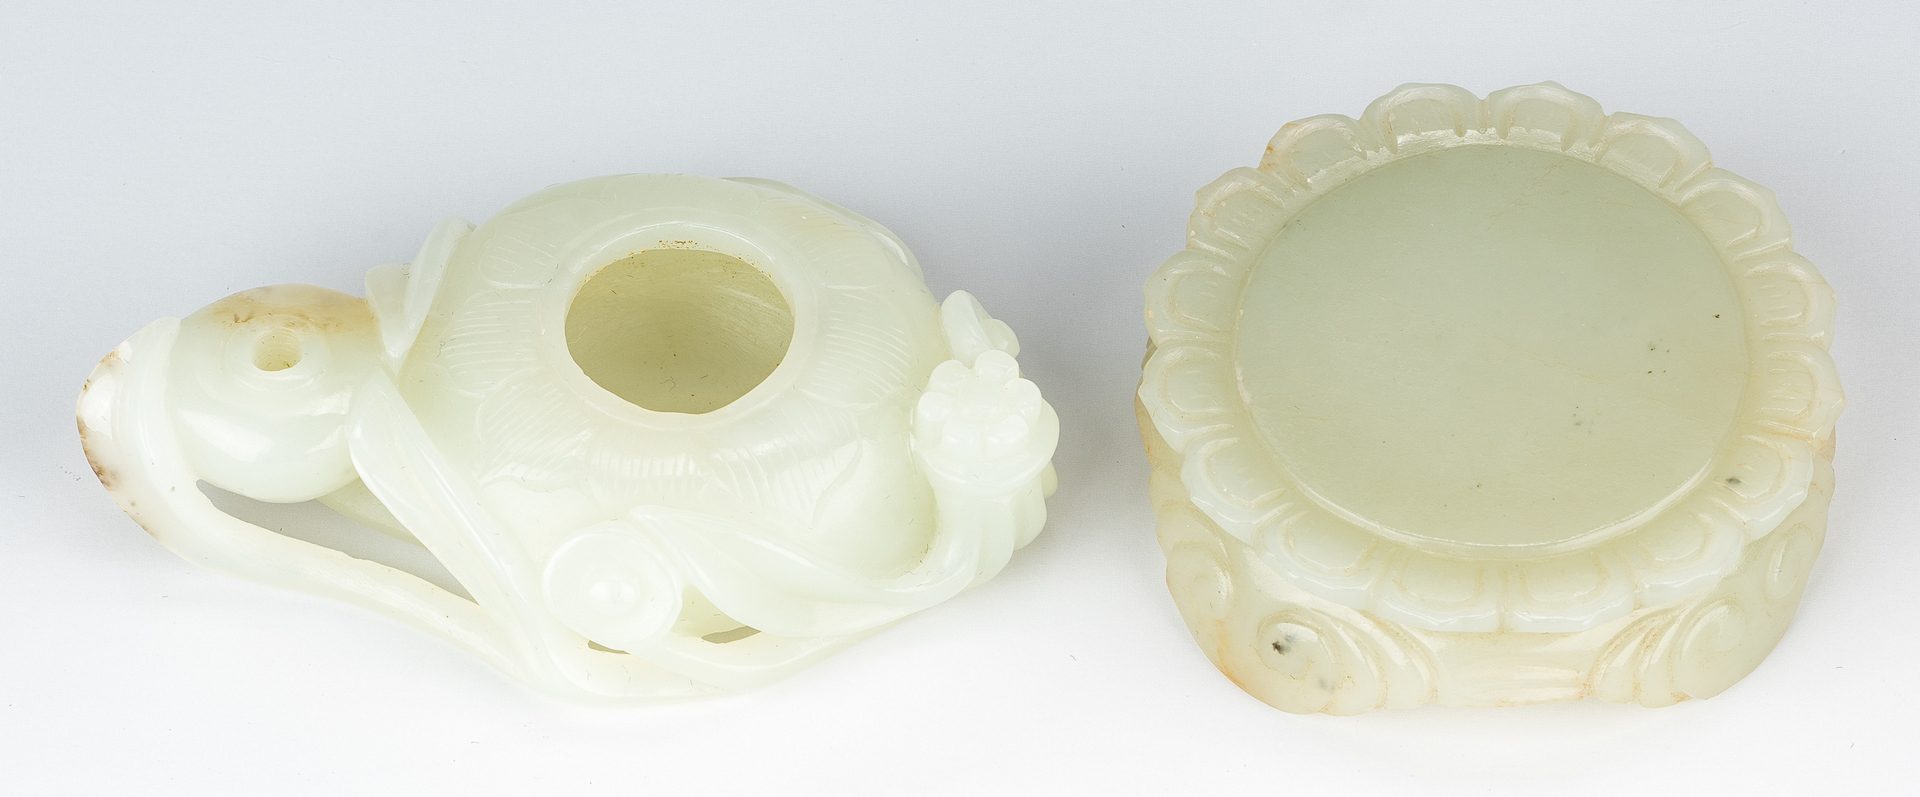 Lot 469: 8 Chinese Carved Jade Items, incl. Animals